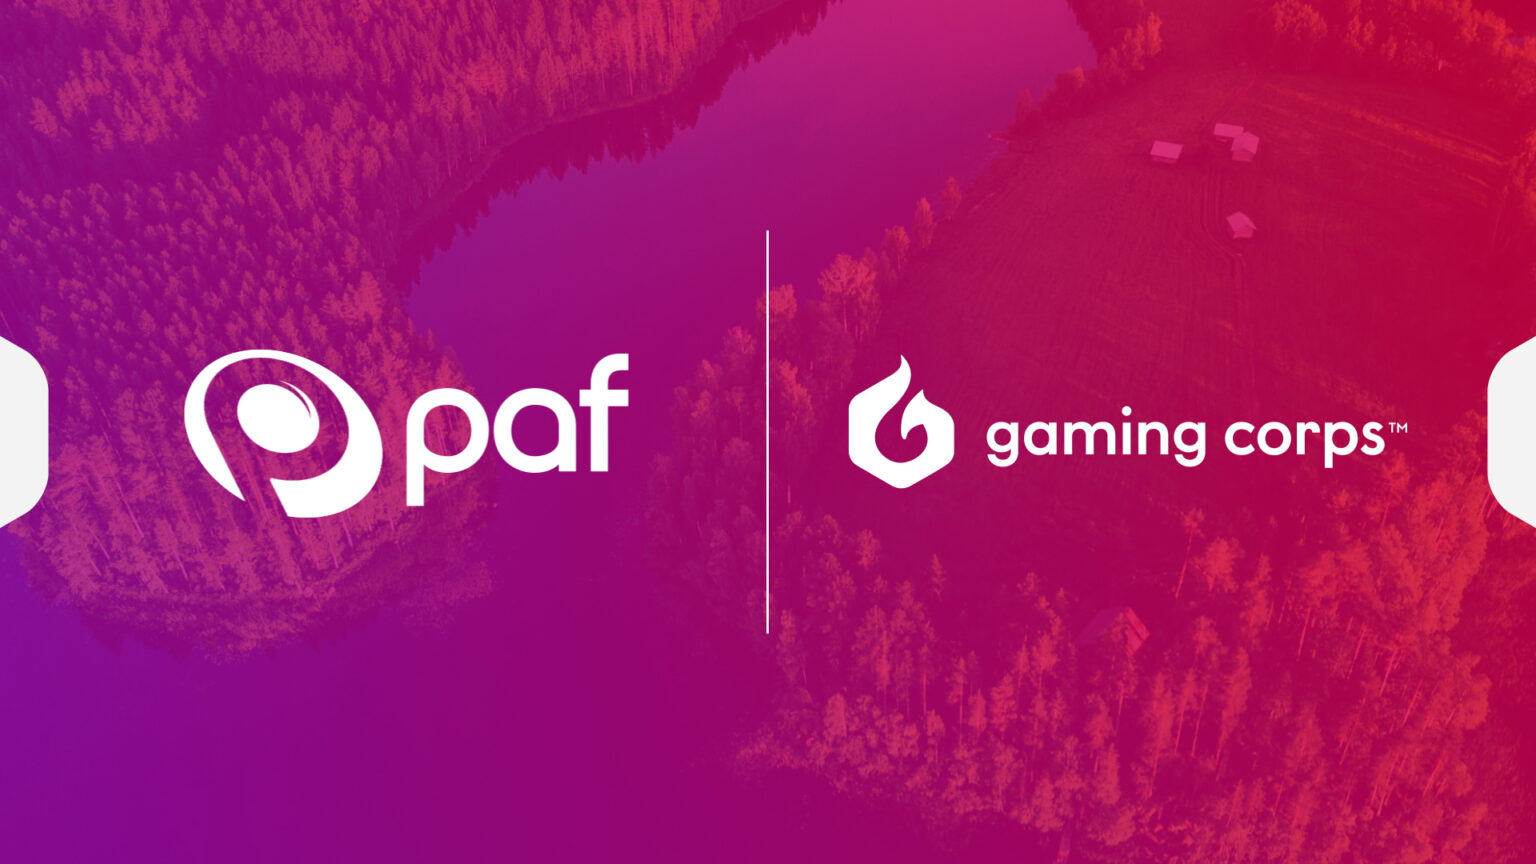 Industry pioneer Paf new Gaming Corps partner